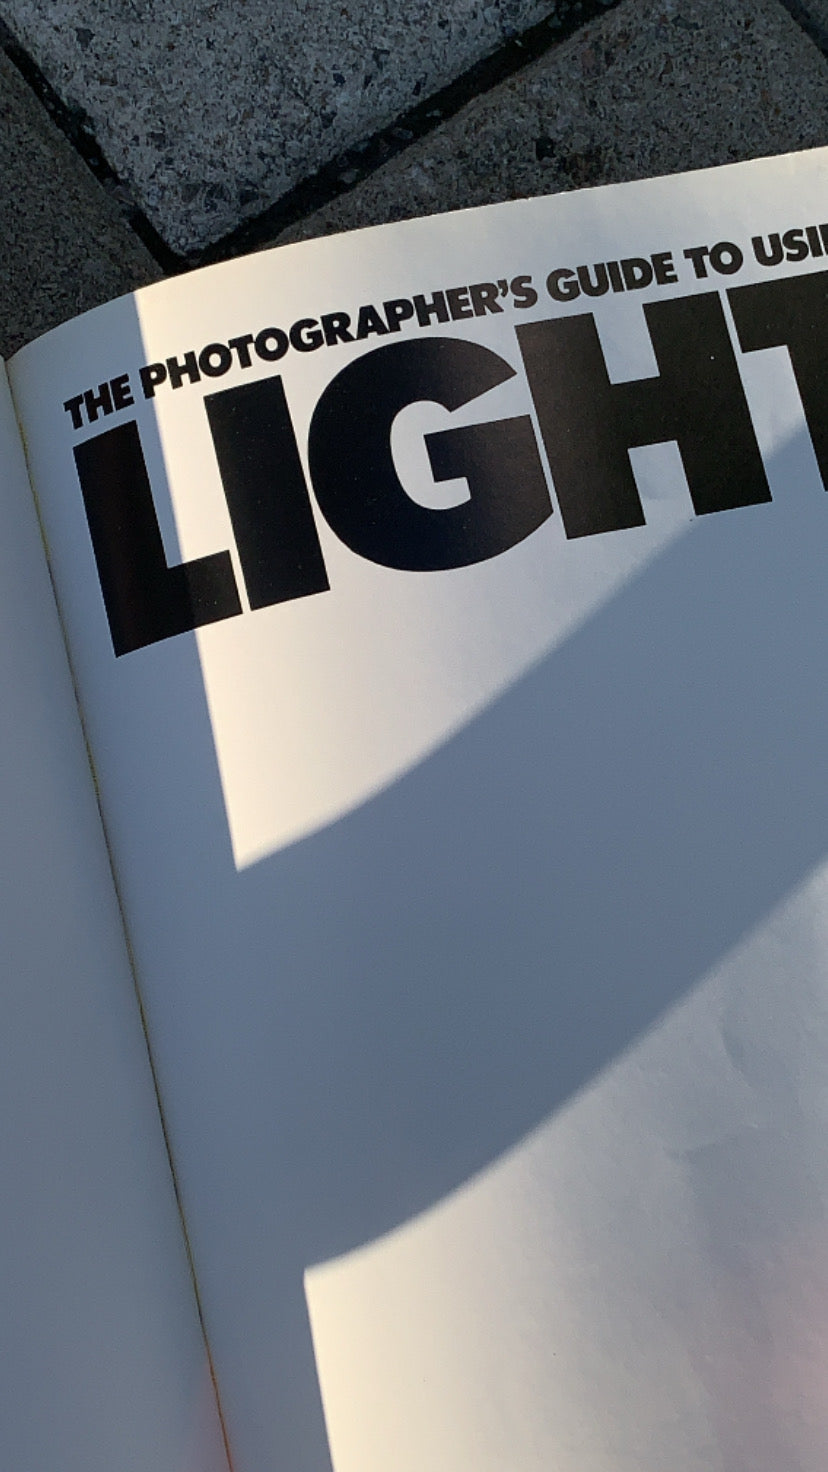 The Photographer’s Guide to Using Light (1986)